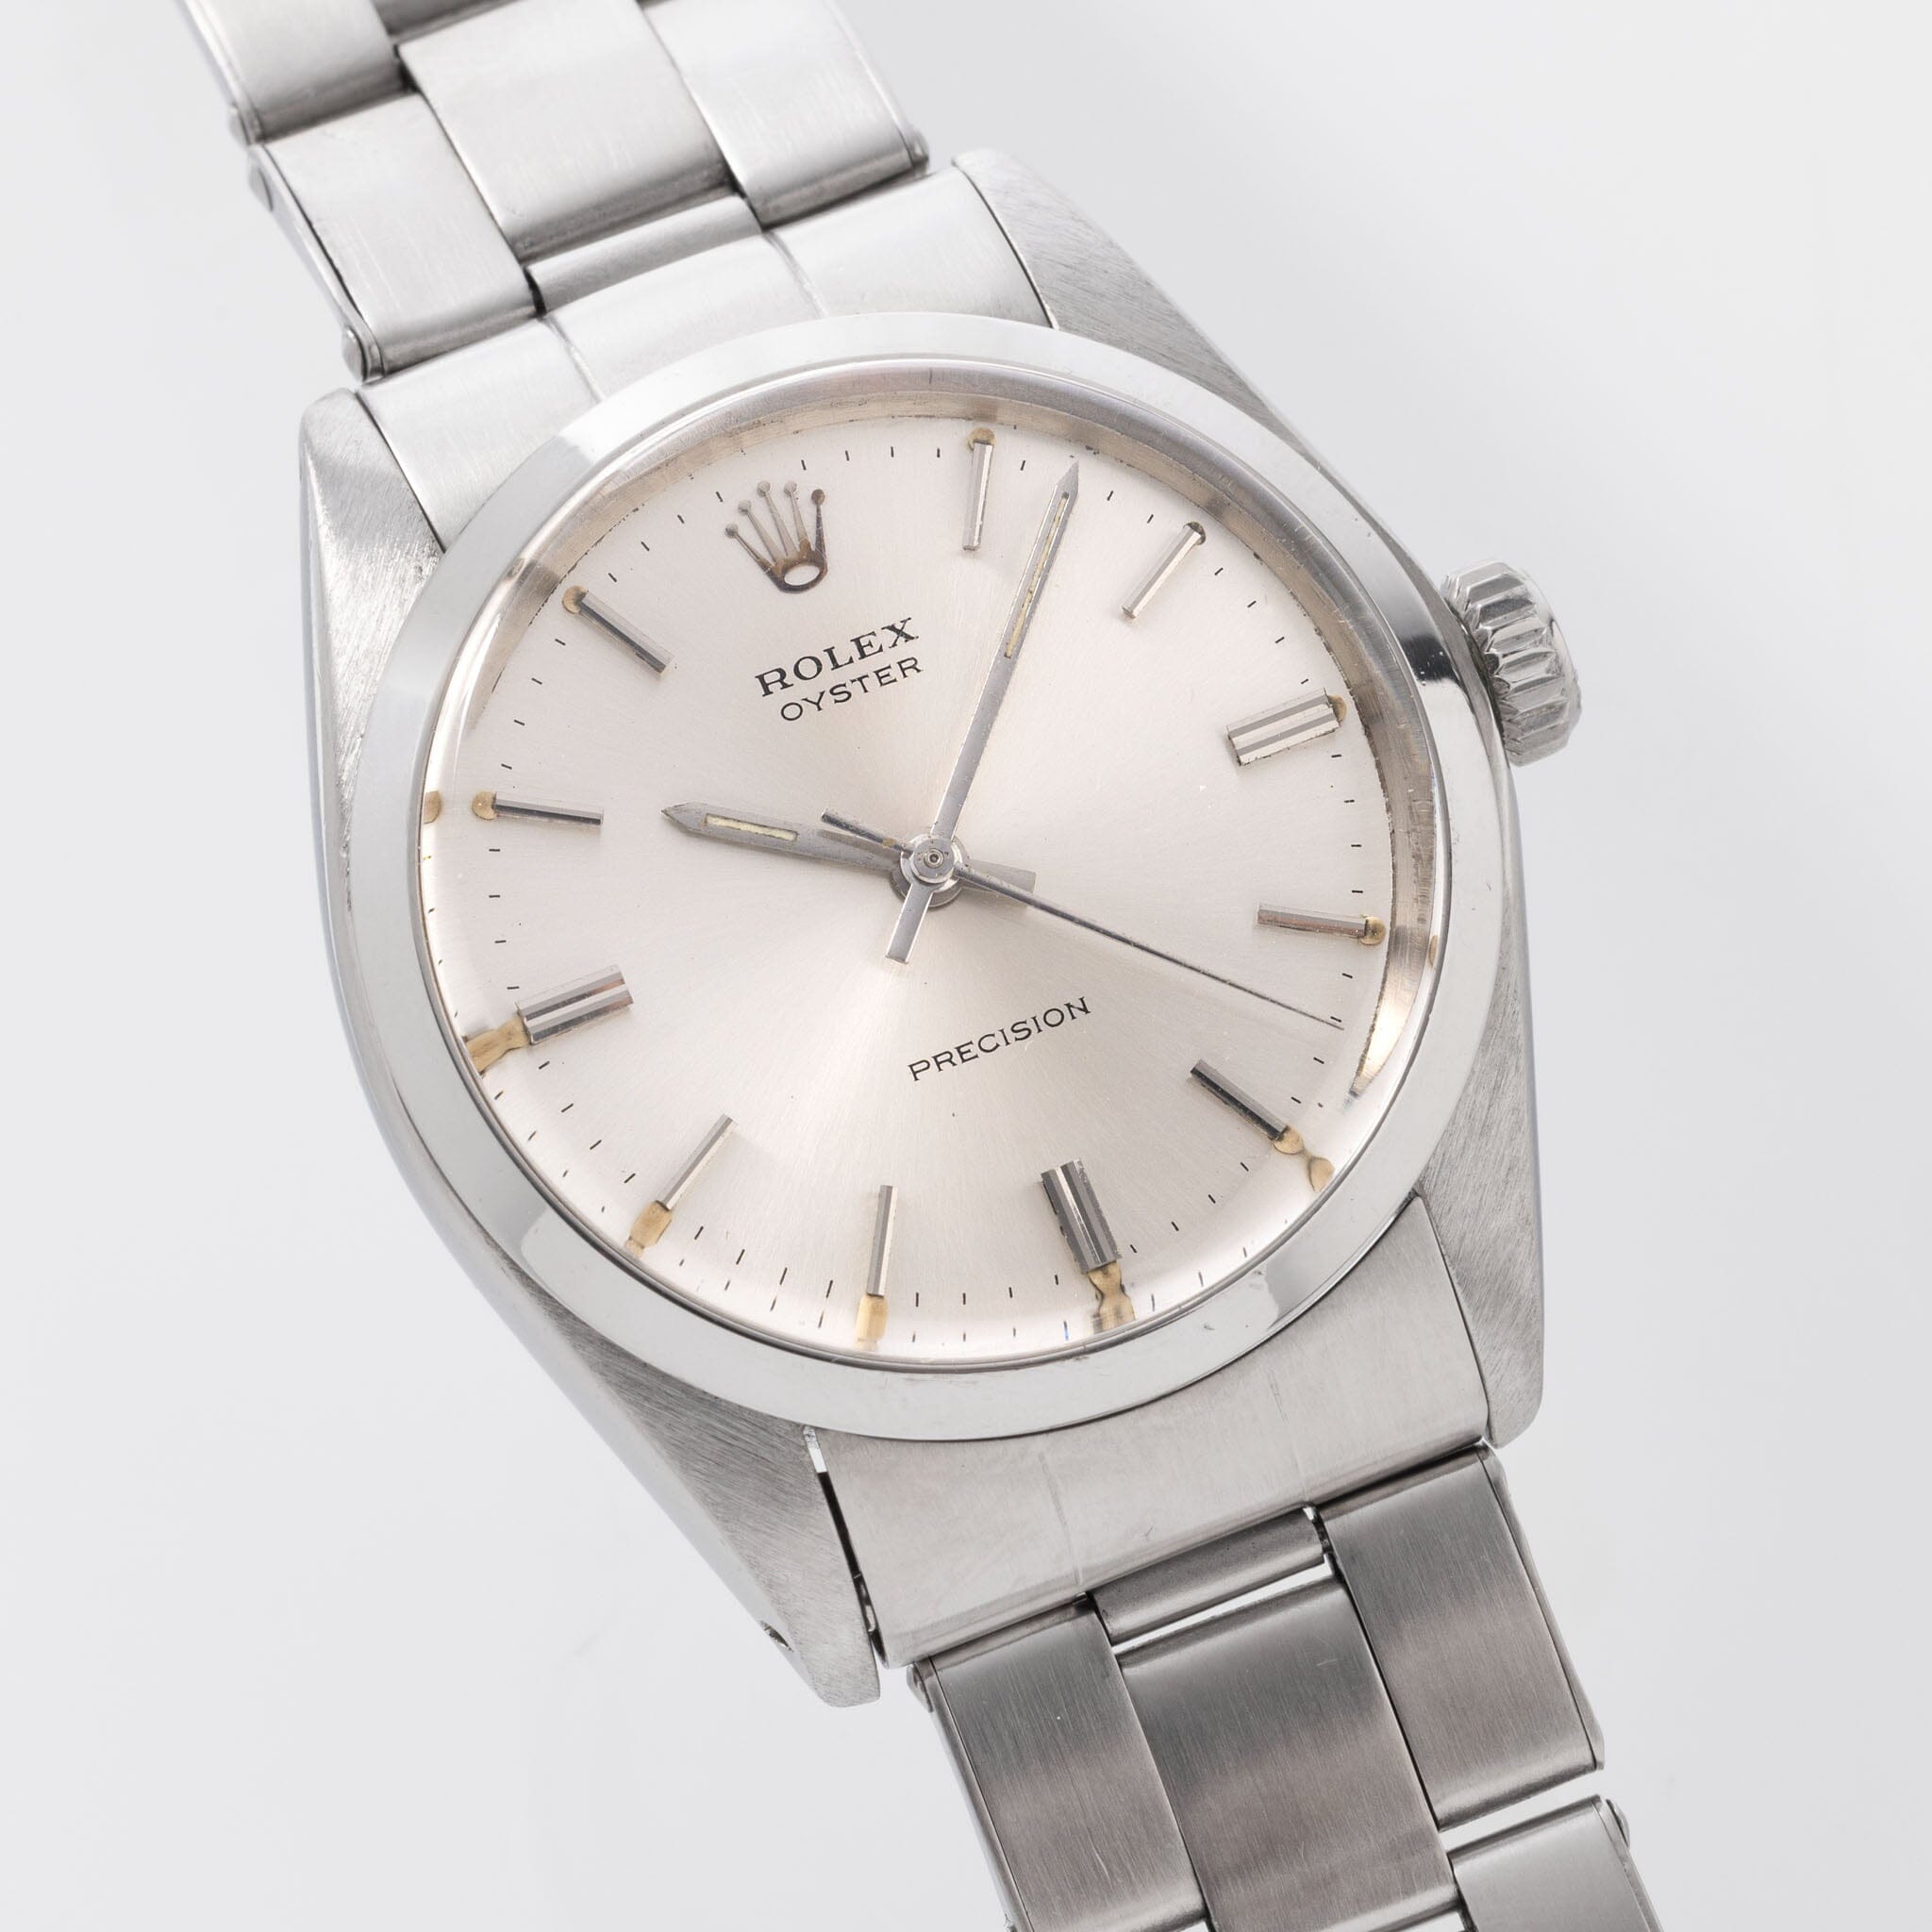 Rolex Oyster Precision 6426 Silver Dial FAP Issued Box and Papers